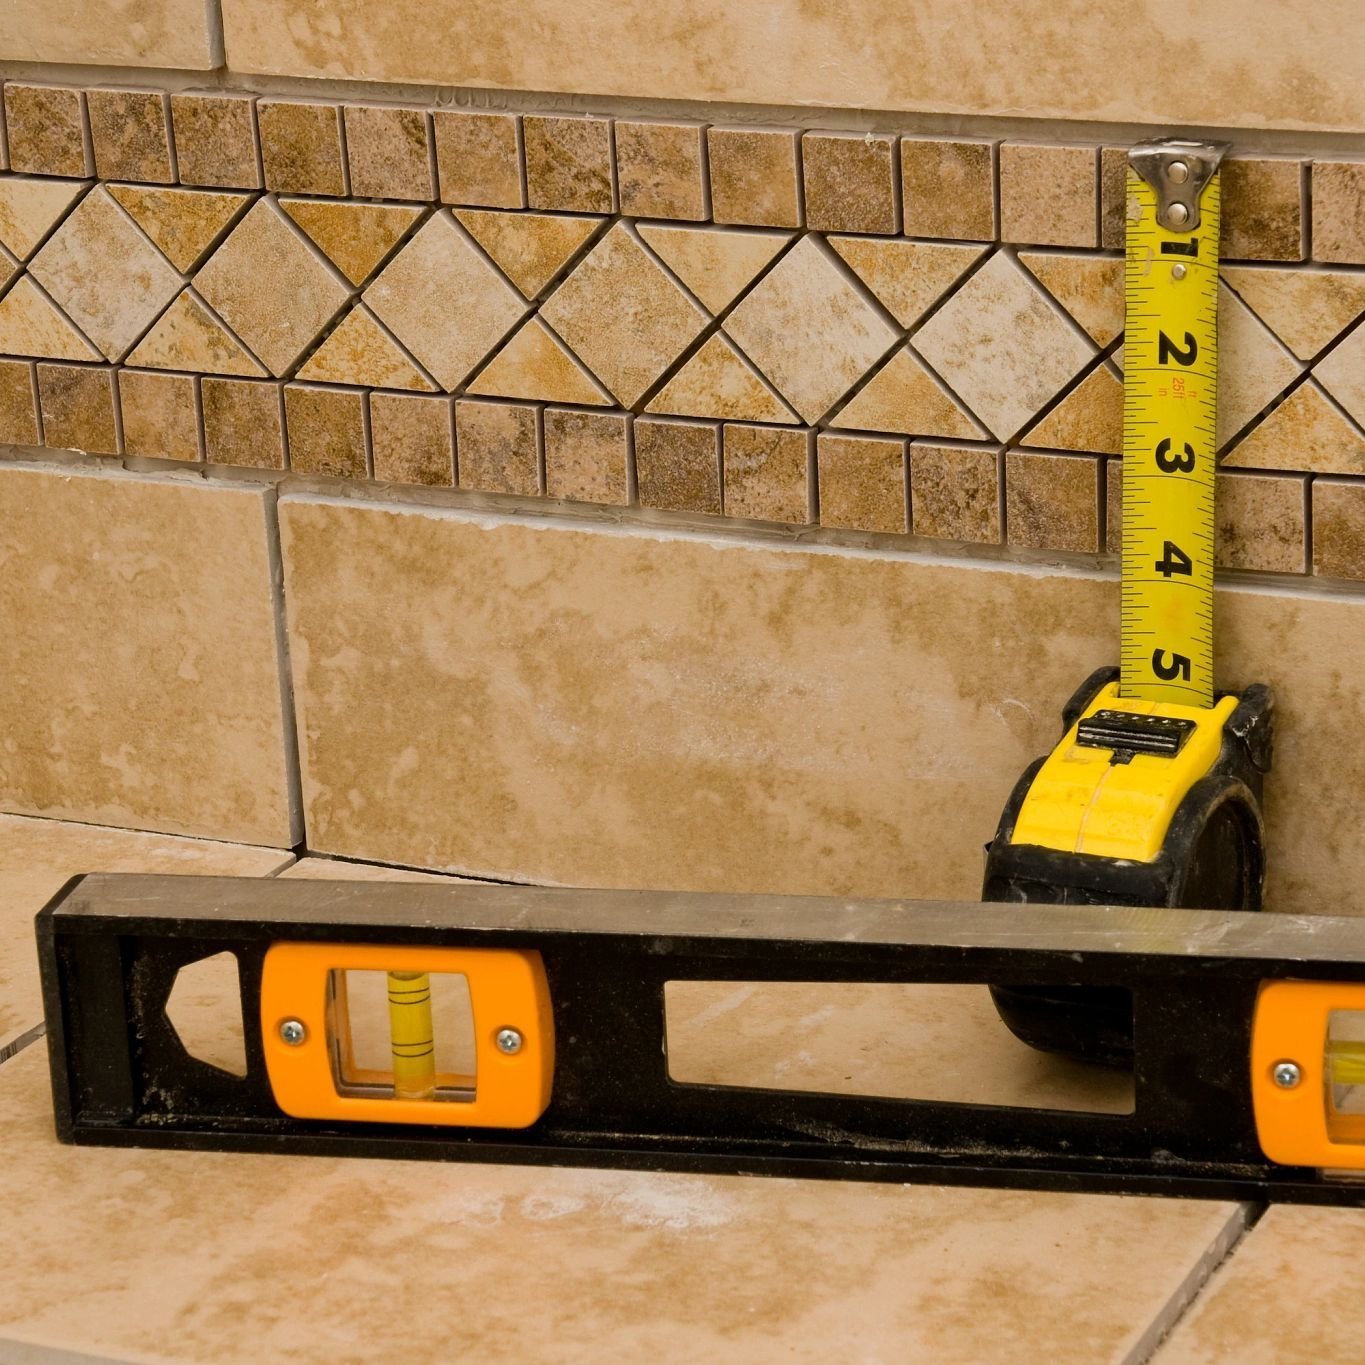 measure tape and level against tile - Home Design of Hastings in Hastings, MN